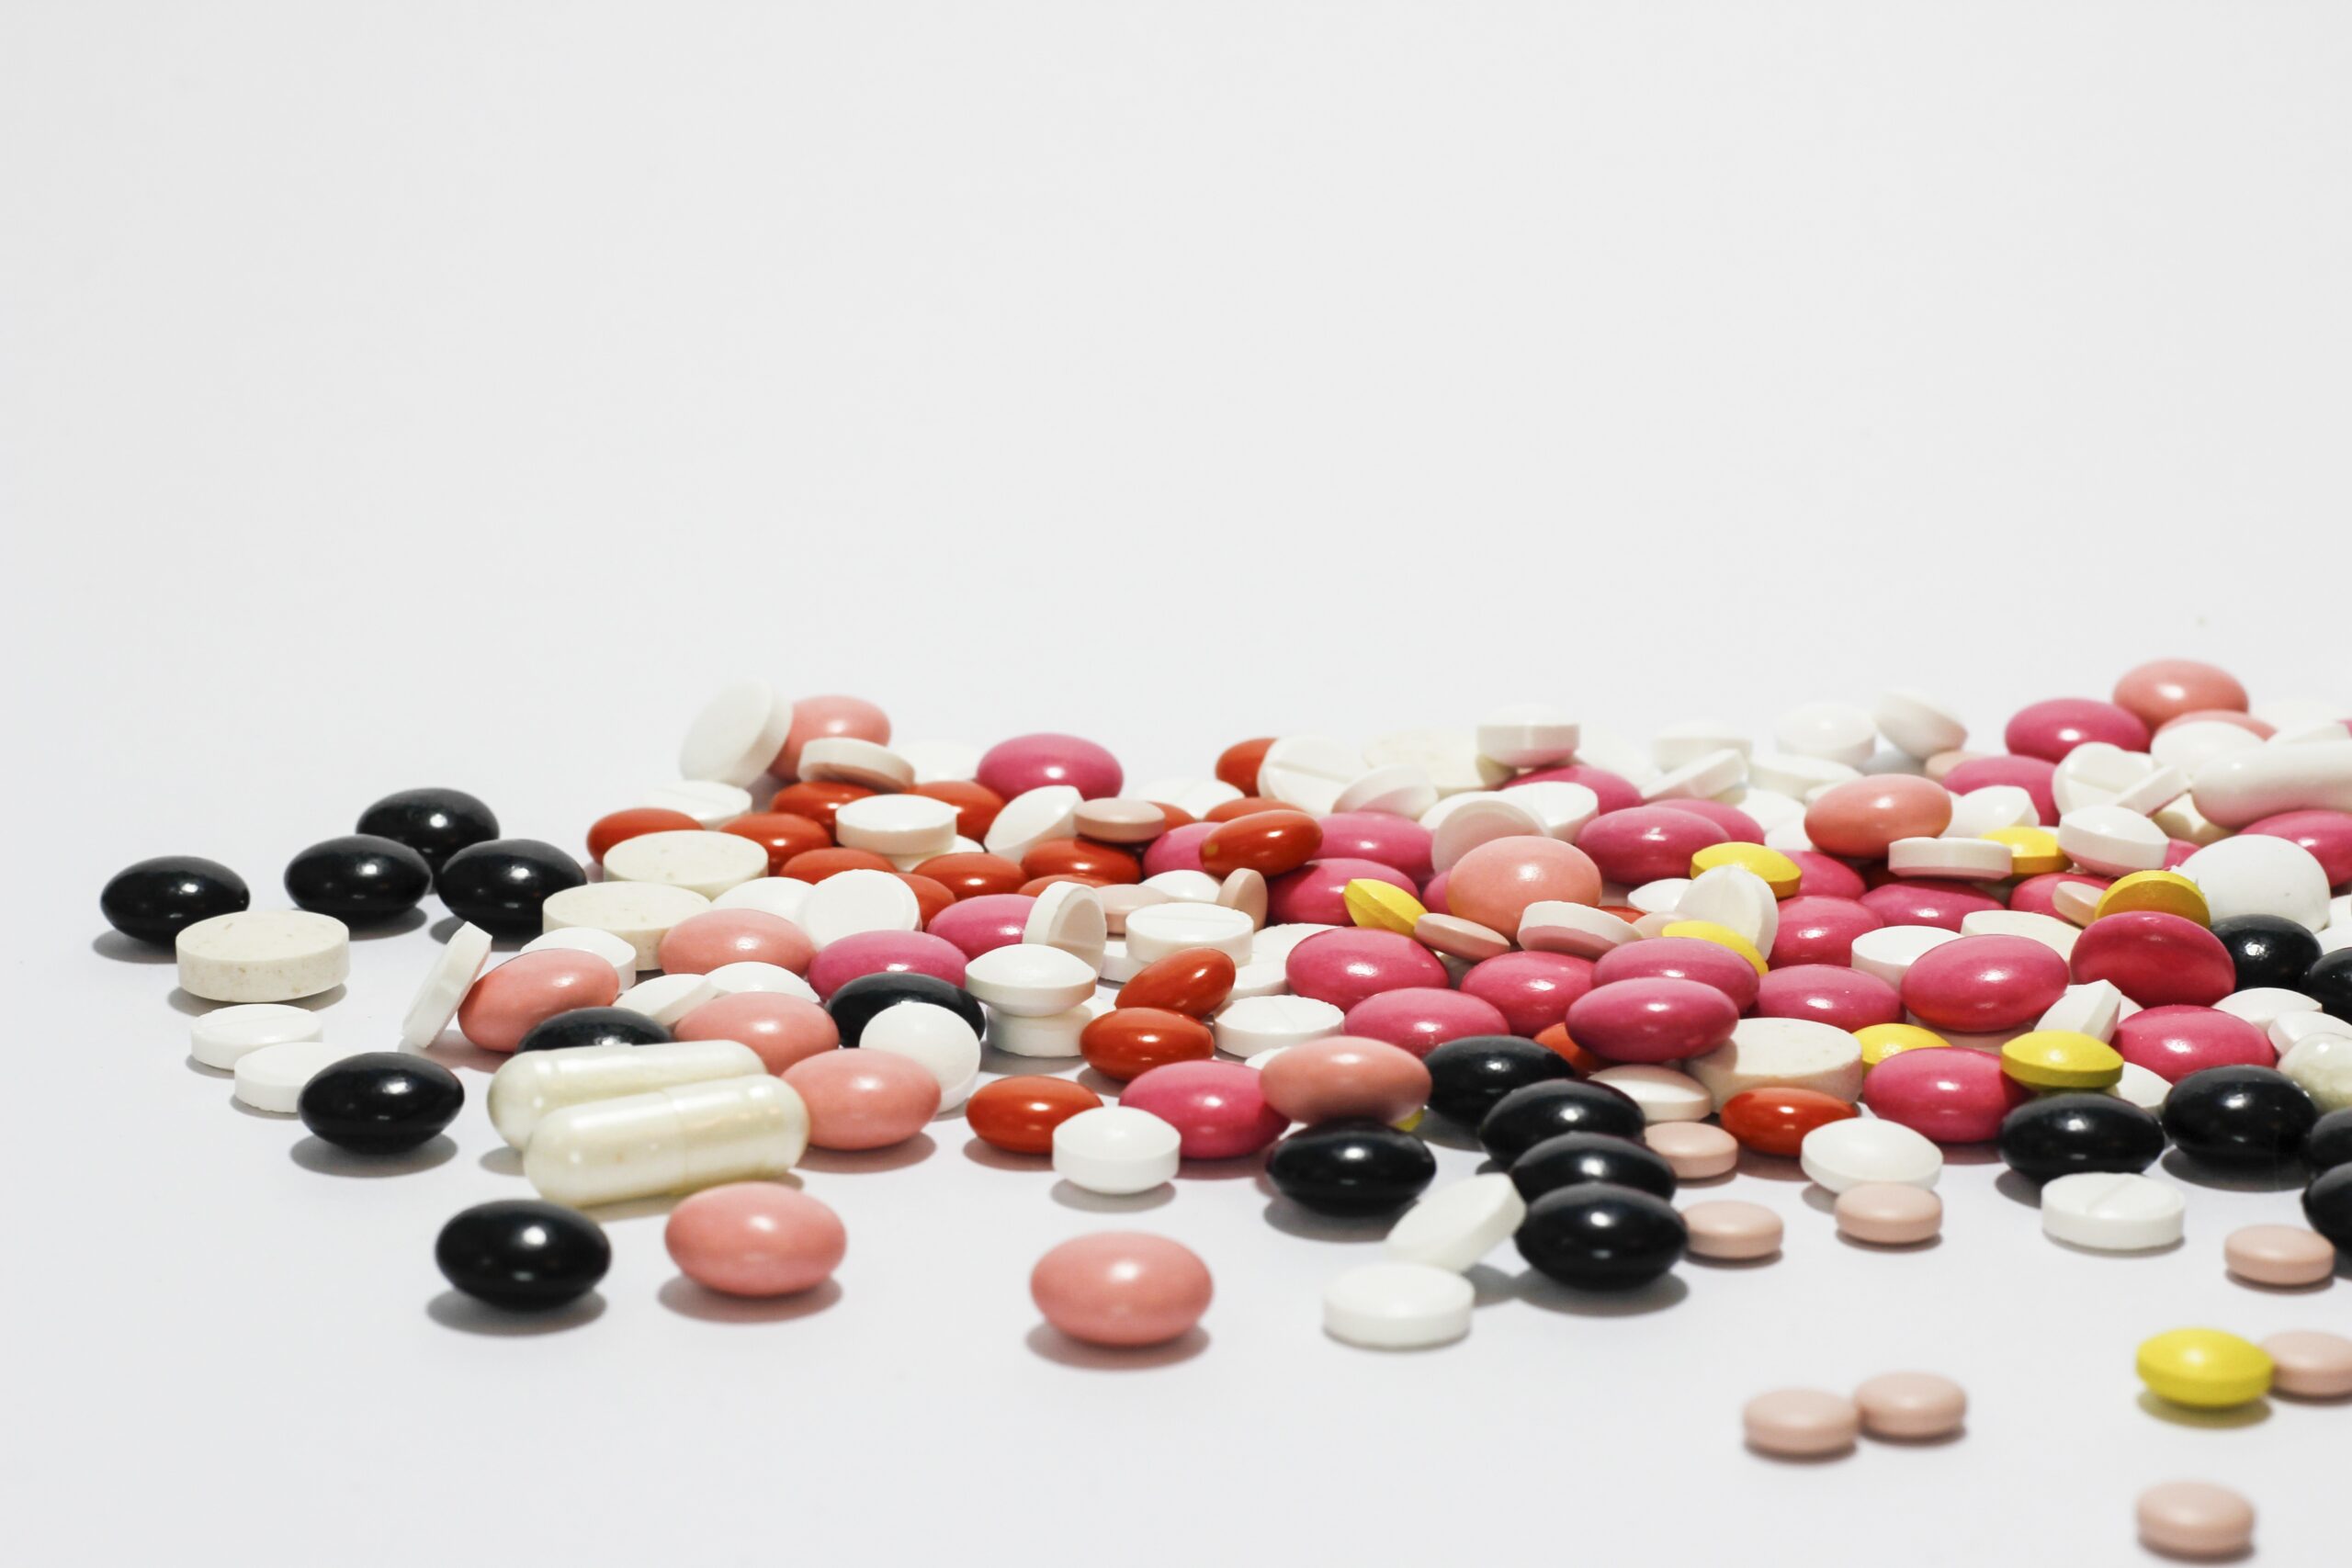 Who’s checking if your vitamins and supplements are safe?